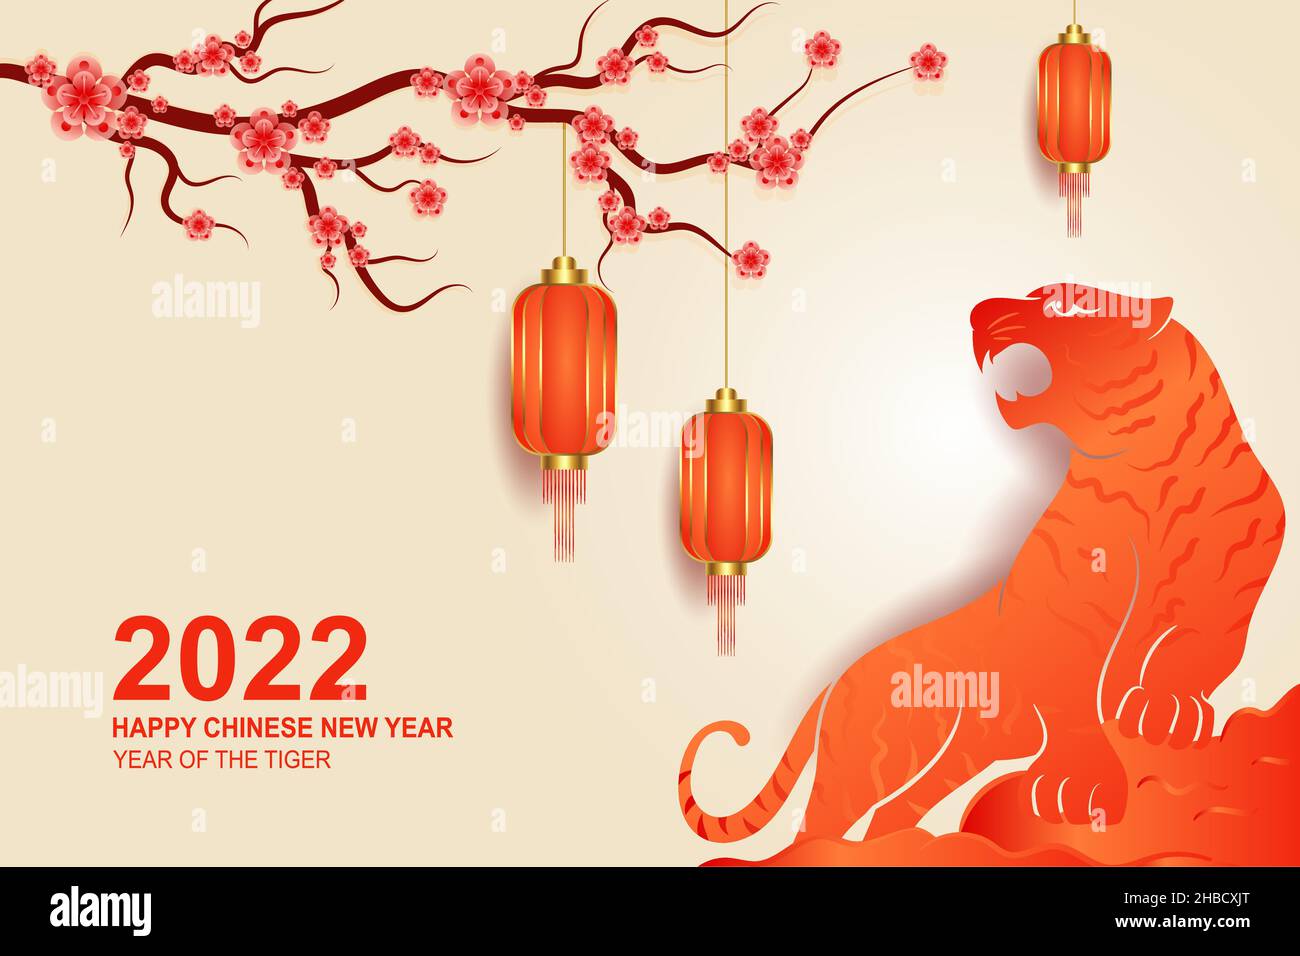 Happy Chinese new year 2022 background with Sakura flower, lantern and tiger illustration Stock Vector